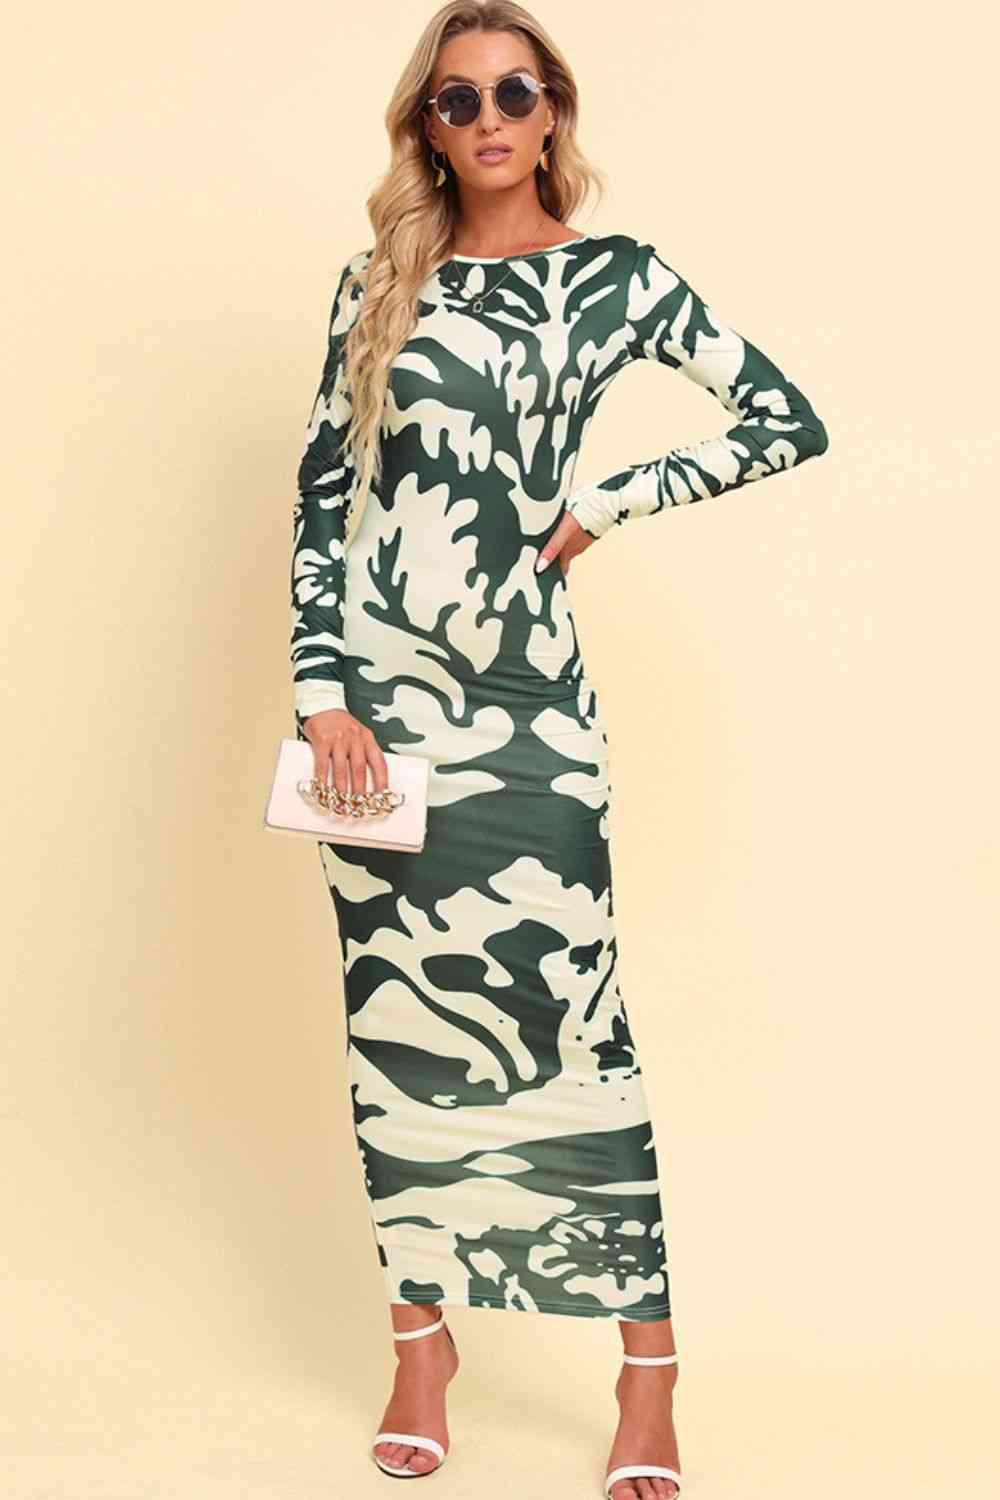 Printed Backless Long Sleeve Maxi Dress Green Camouflage S 